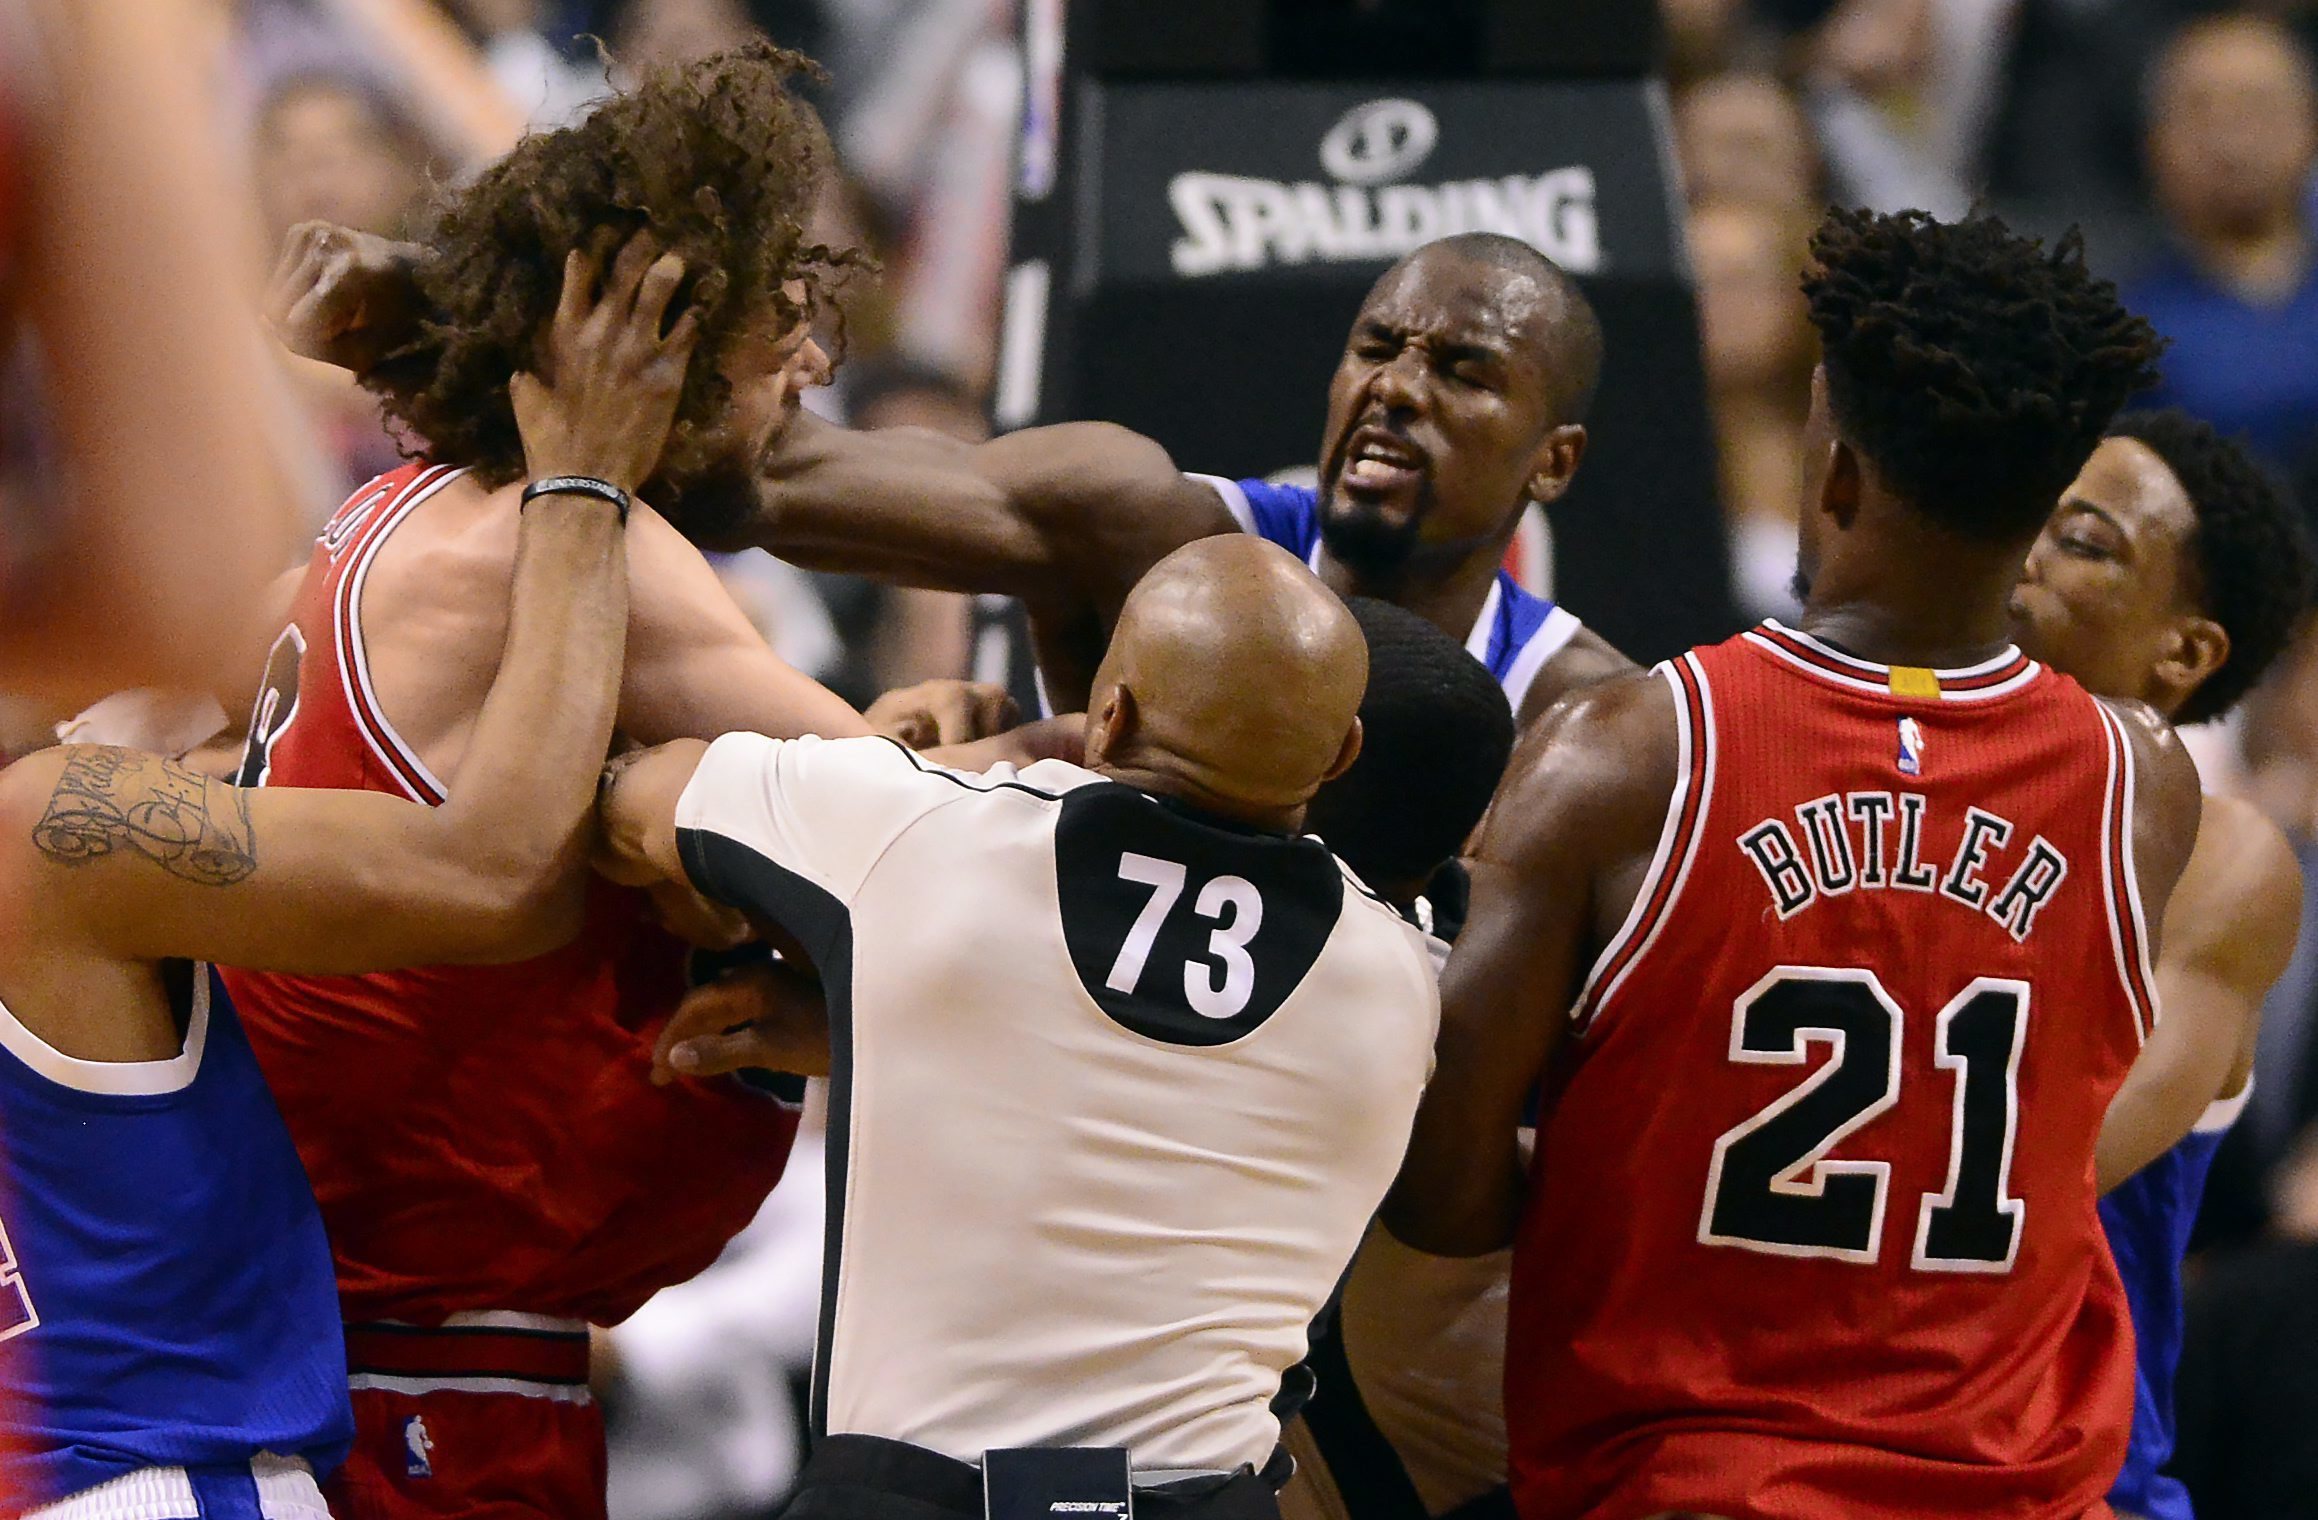 Toronto Raptors forward Serge Ibaka (9) lands a strike on Chicago Bulls center Robin Lopez (8) during a scuffle  during second half of an NBA basketball game in Toronto, Tuesday, March 21, 2017. (Frank Gunn/The Canadian Press via AP)